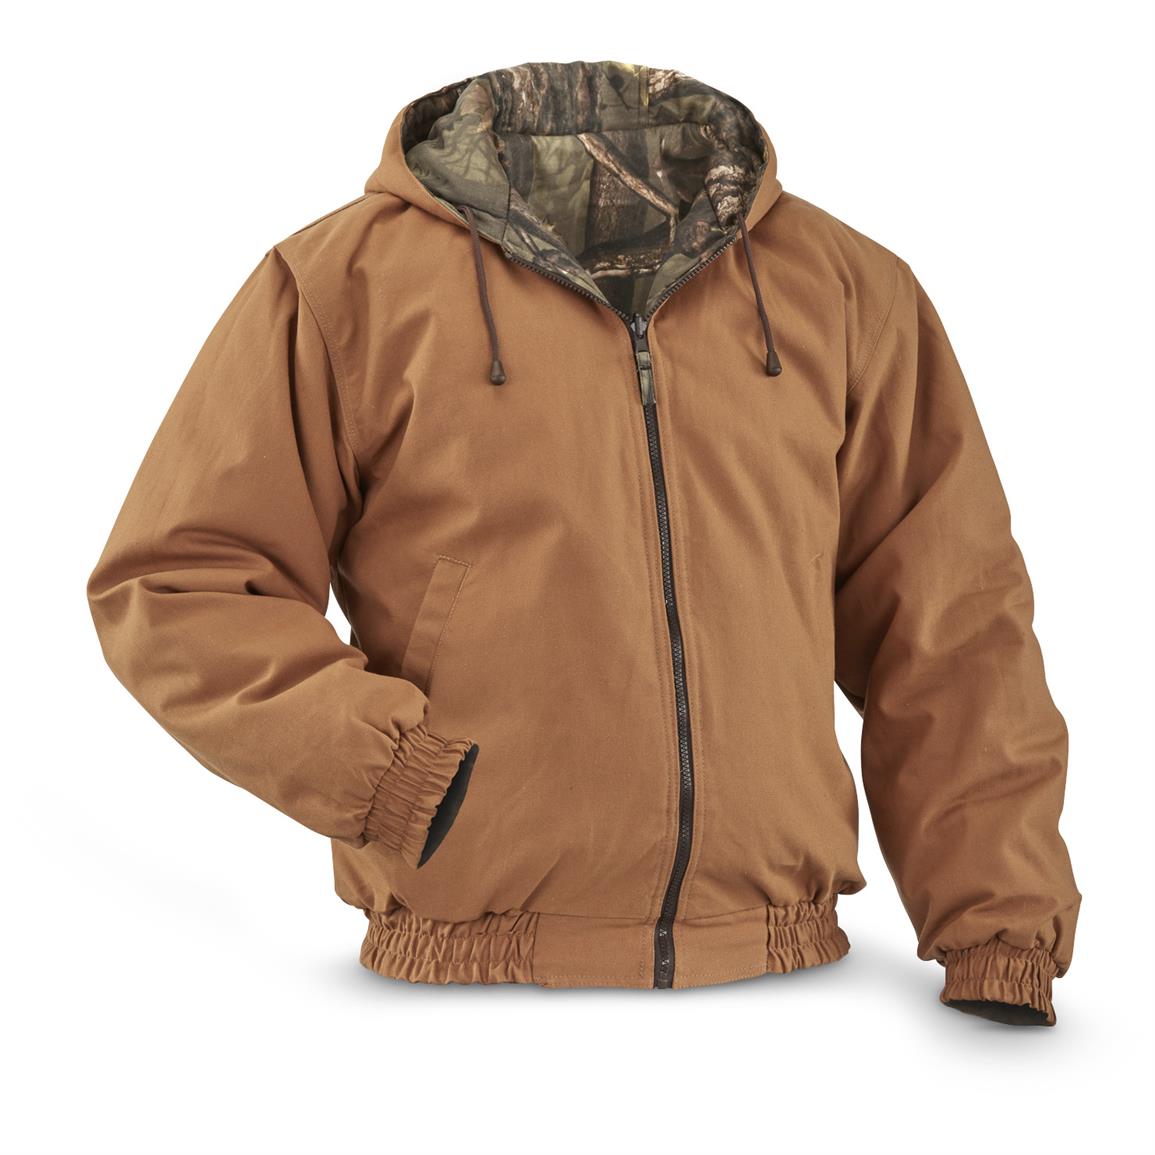 Men's Reversible Canvas Insulated Jacket - 656509, Camo Jackets at